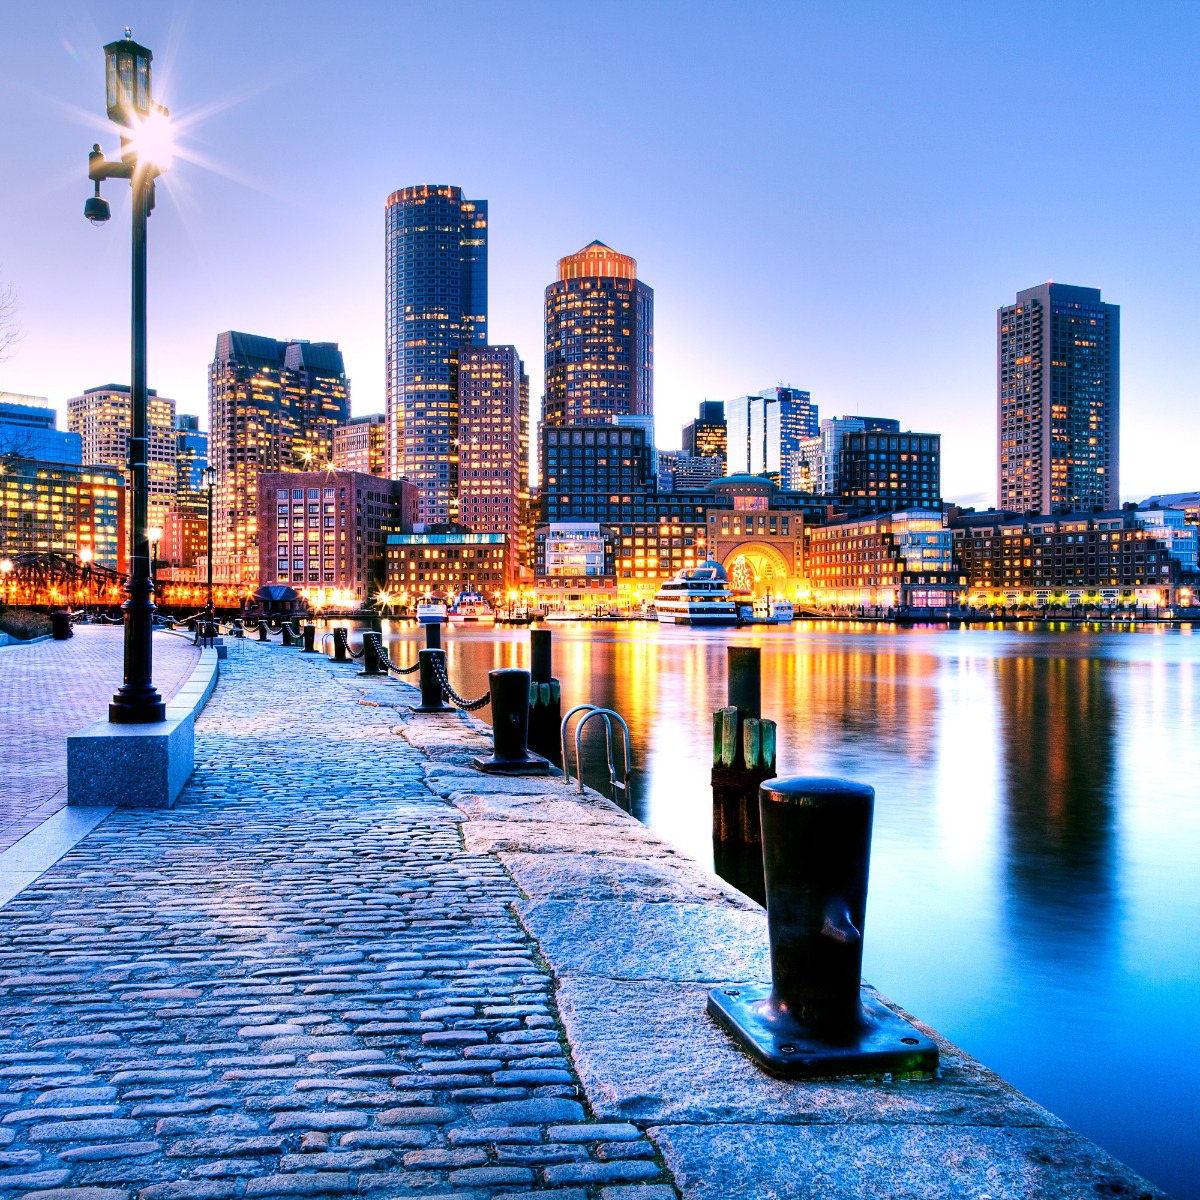 The Boston Harbor and Financial District in Massachusetts, USA.
